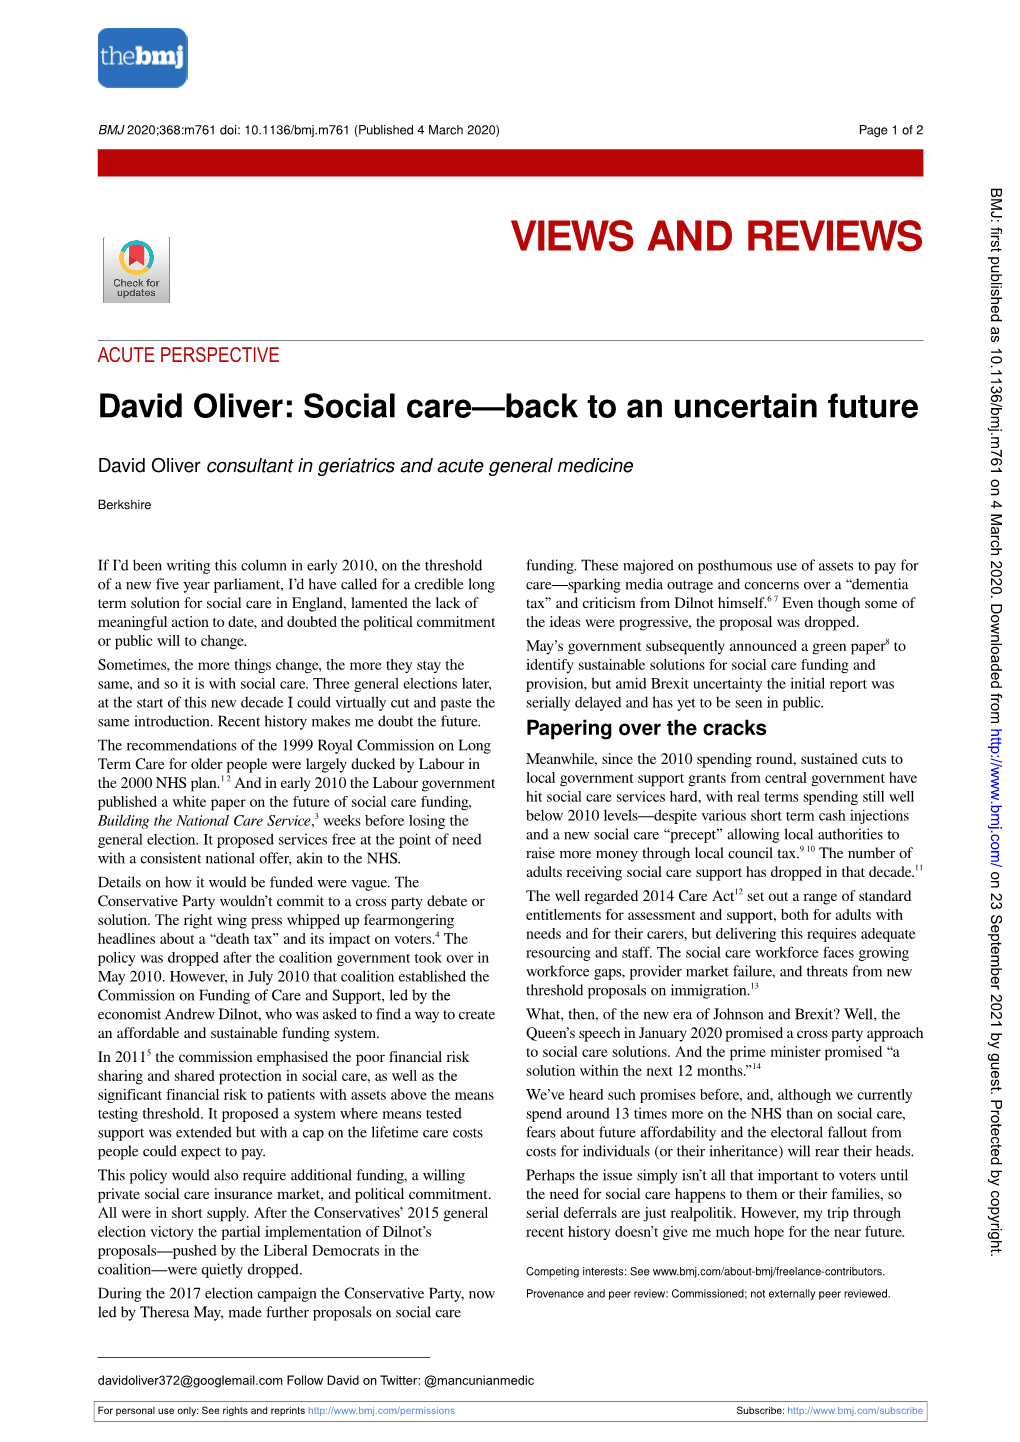 Social Care—Back to an Uncertain Future